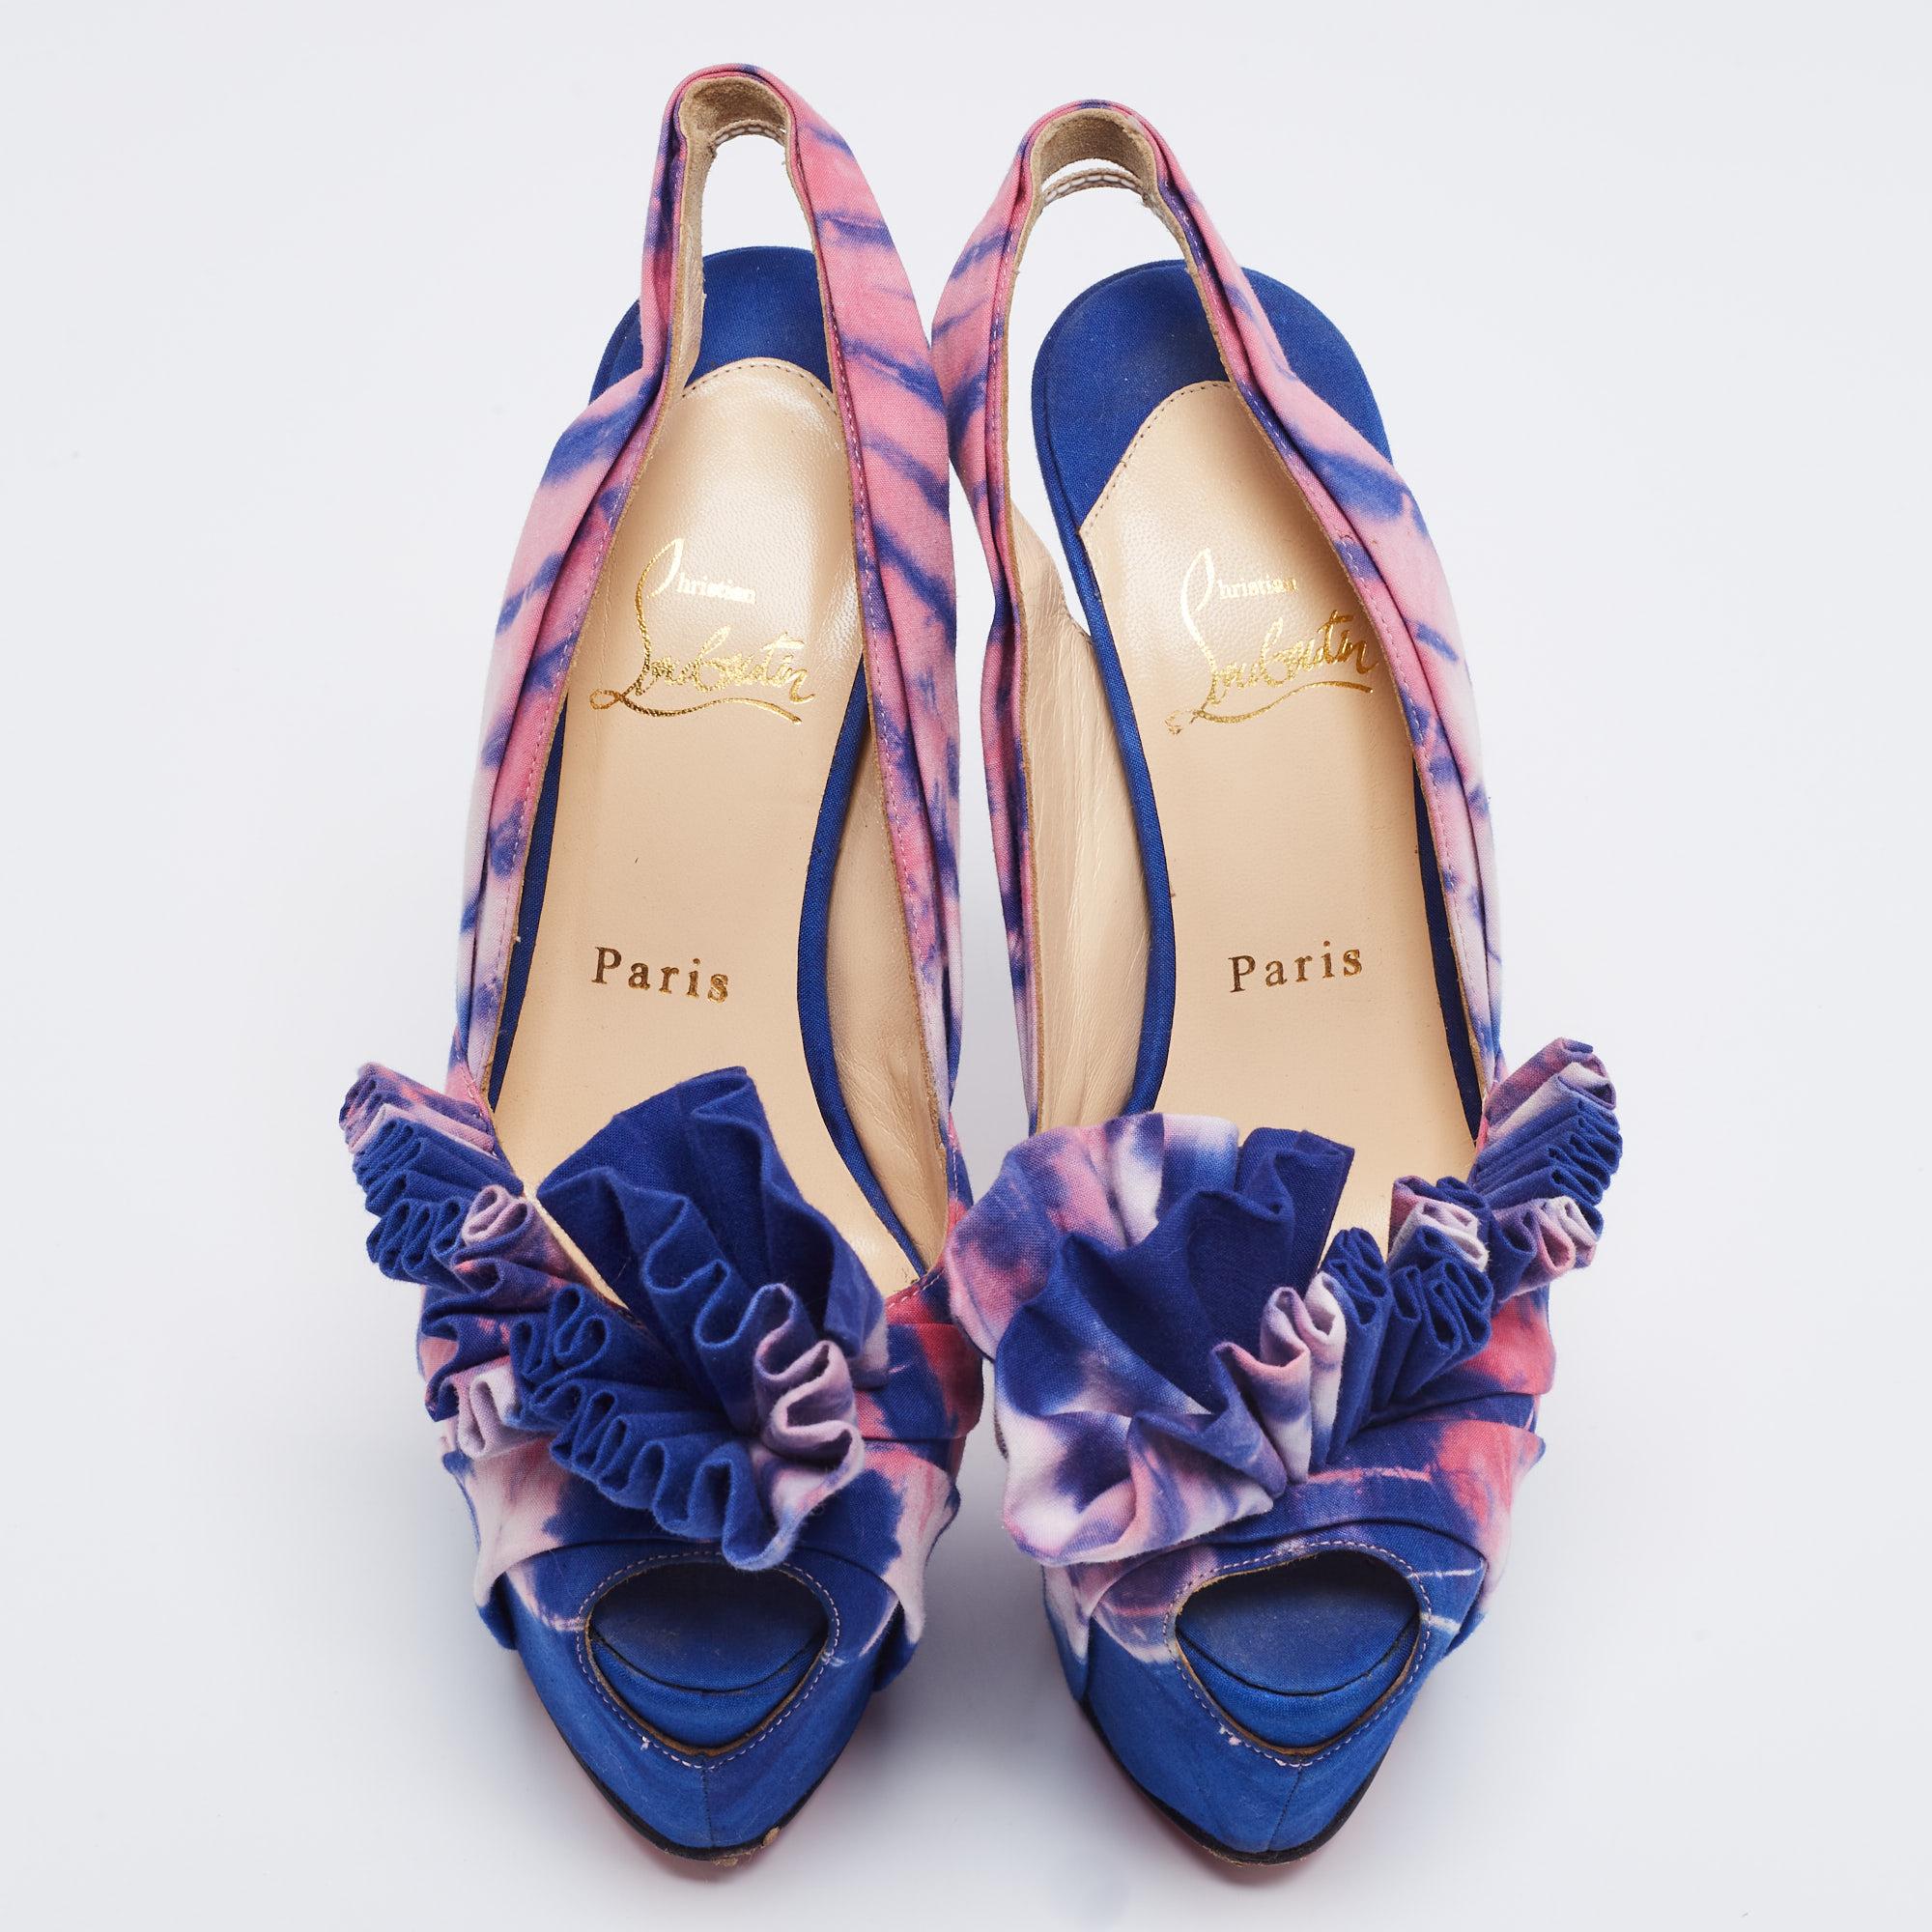 The employment of blue and pink shades lends these Christian Louboutin sandals an elegant contrast. Created from fabric, the design is highlighted with attractive detailing on the vamps and features 15.5cm heels for the perfect height.

